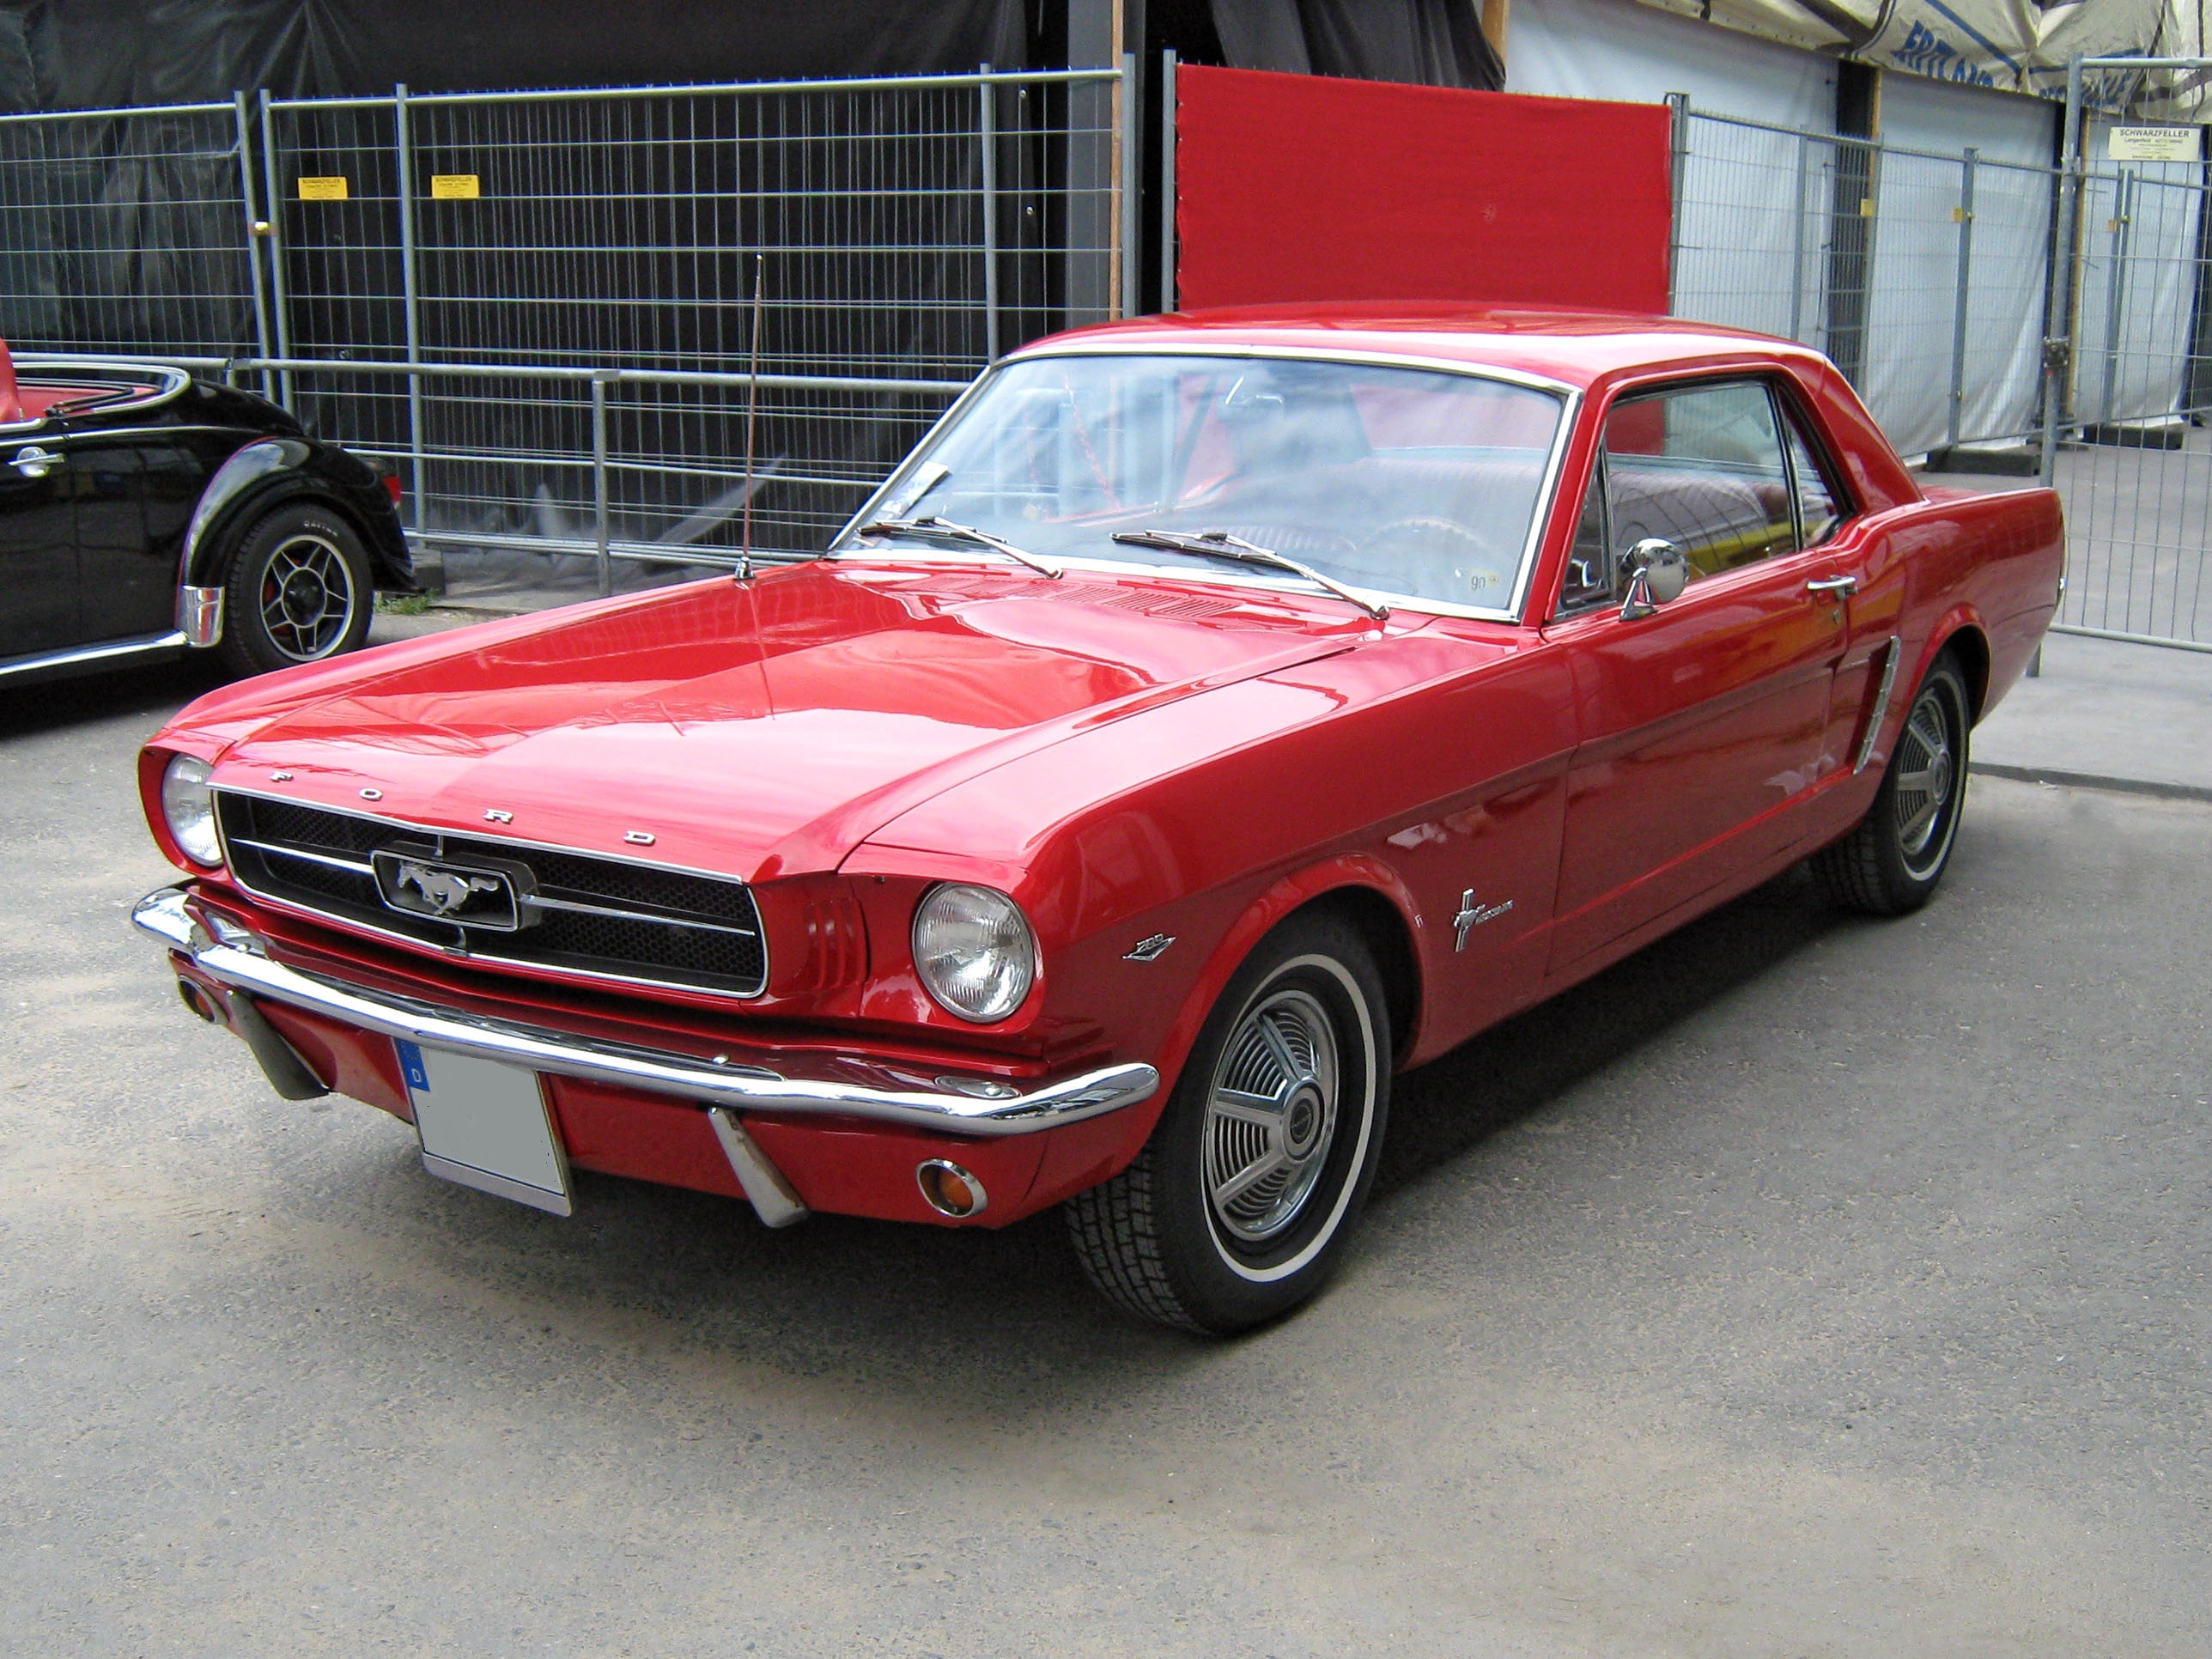 front view, ford, mustang, cars, 1965, hard roof Desktop home screen Wallpaper